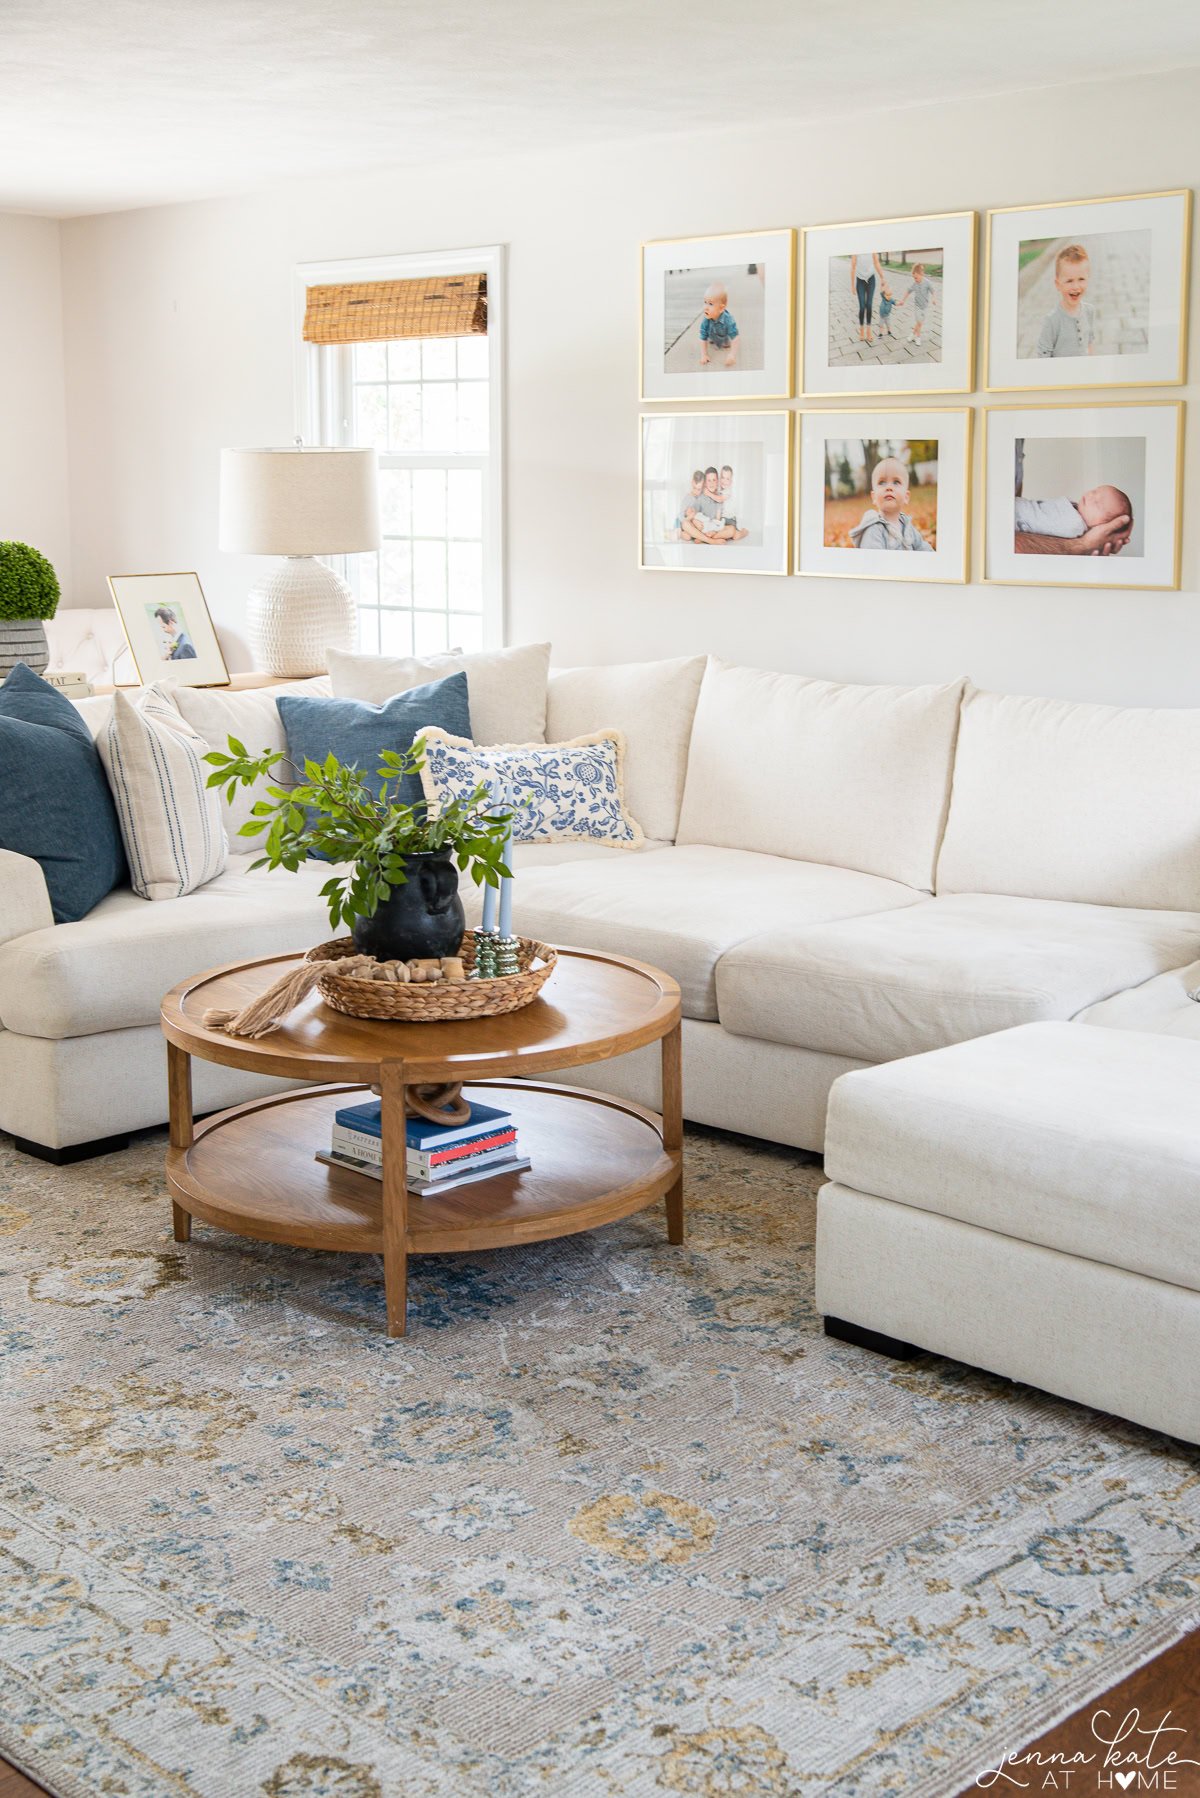 5 Simple Ways to Find Your Personal Decorating Style